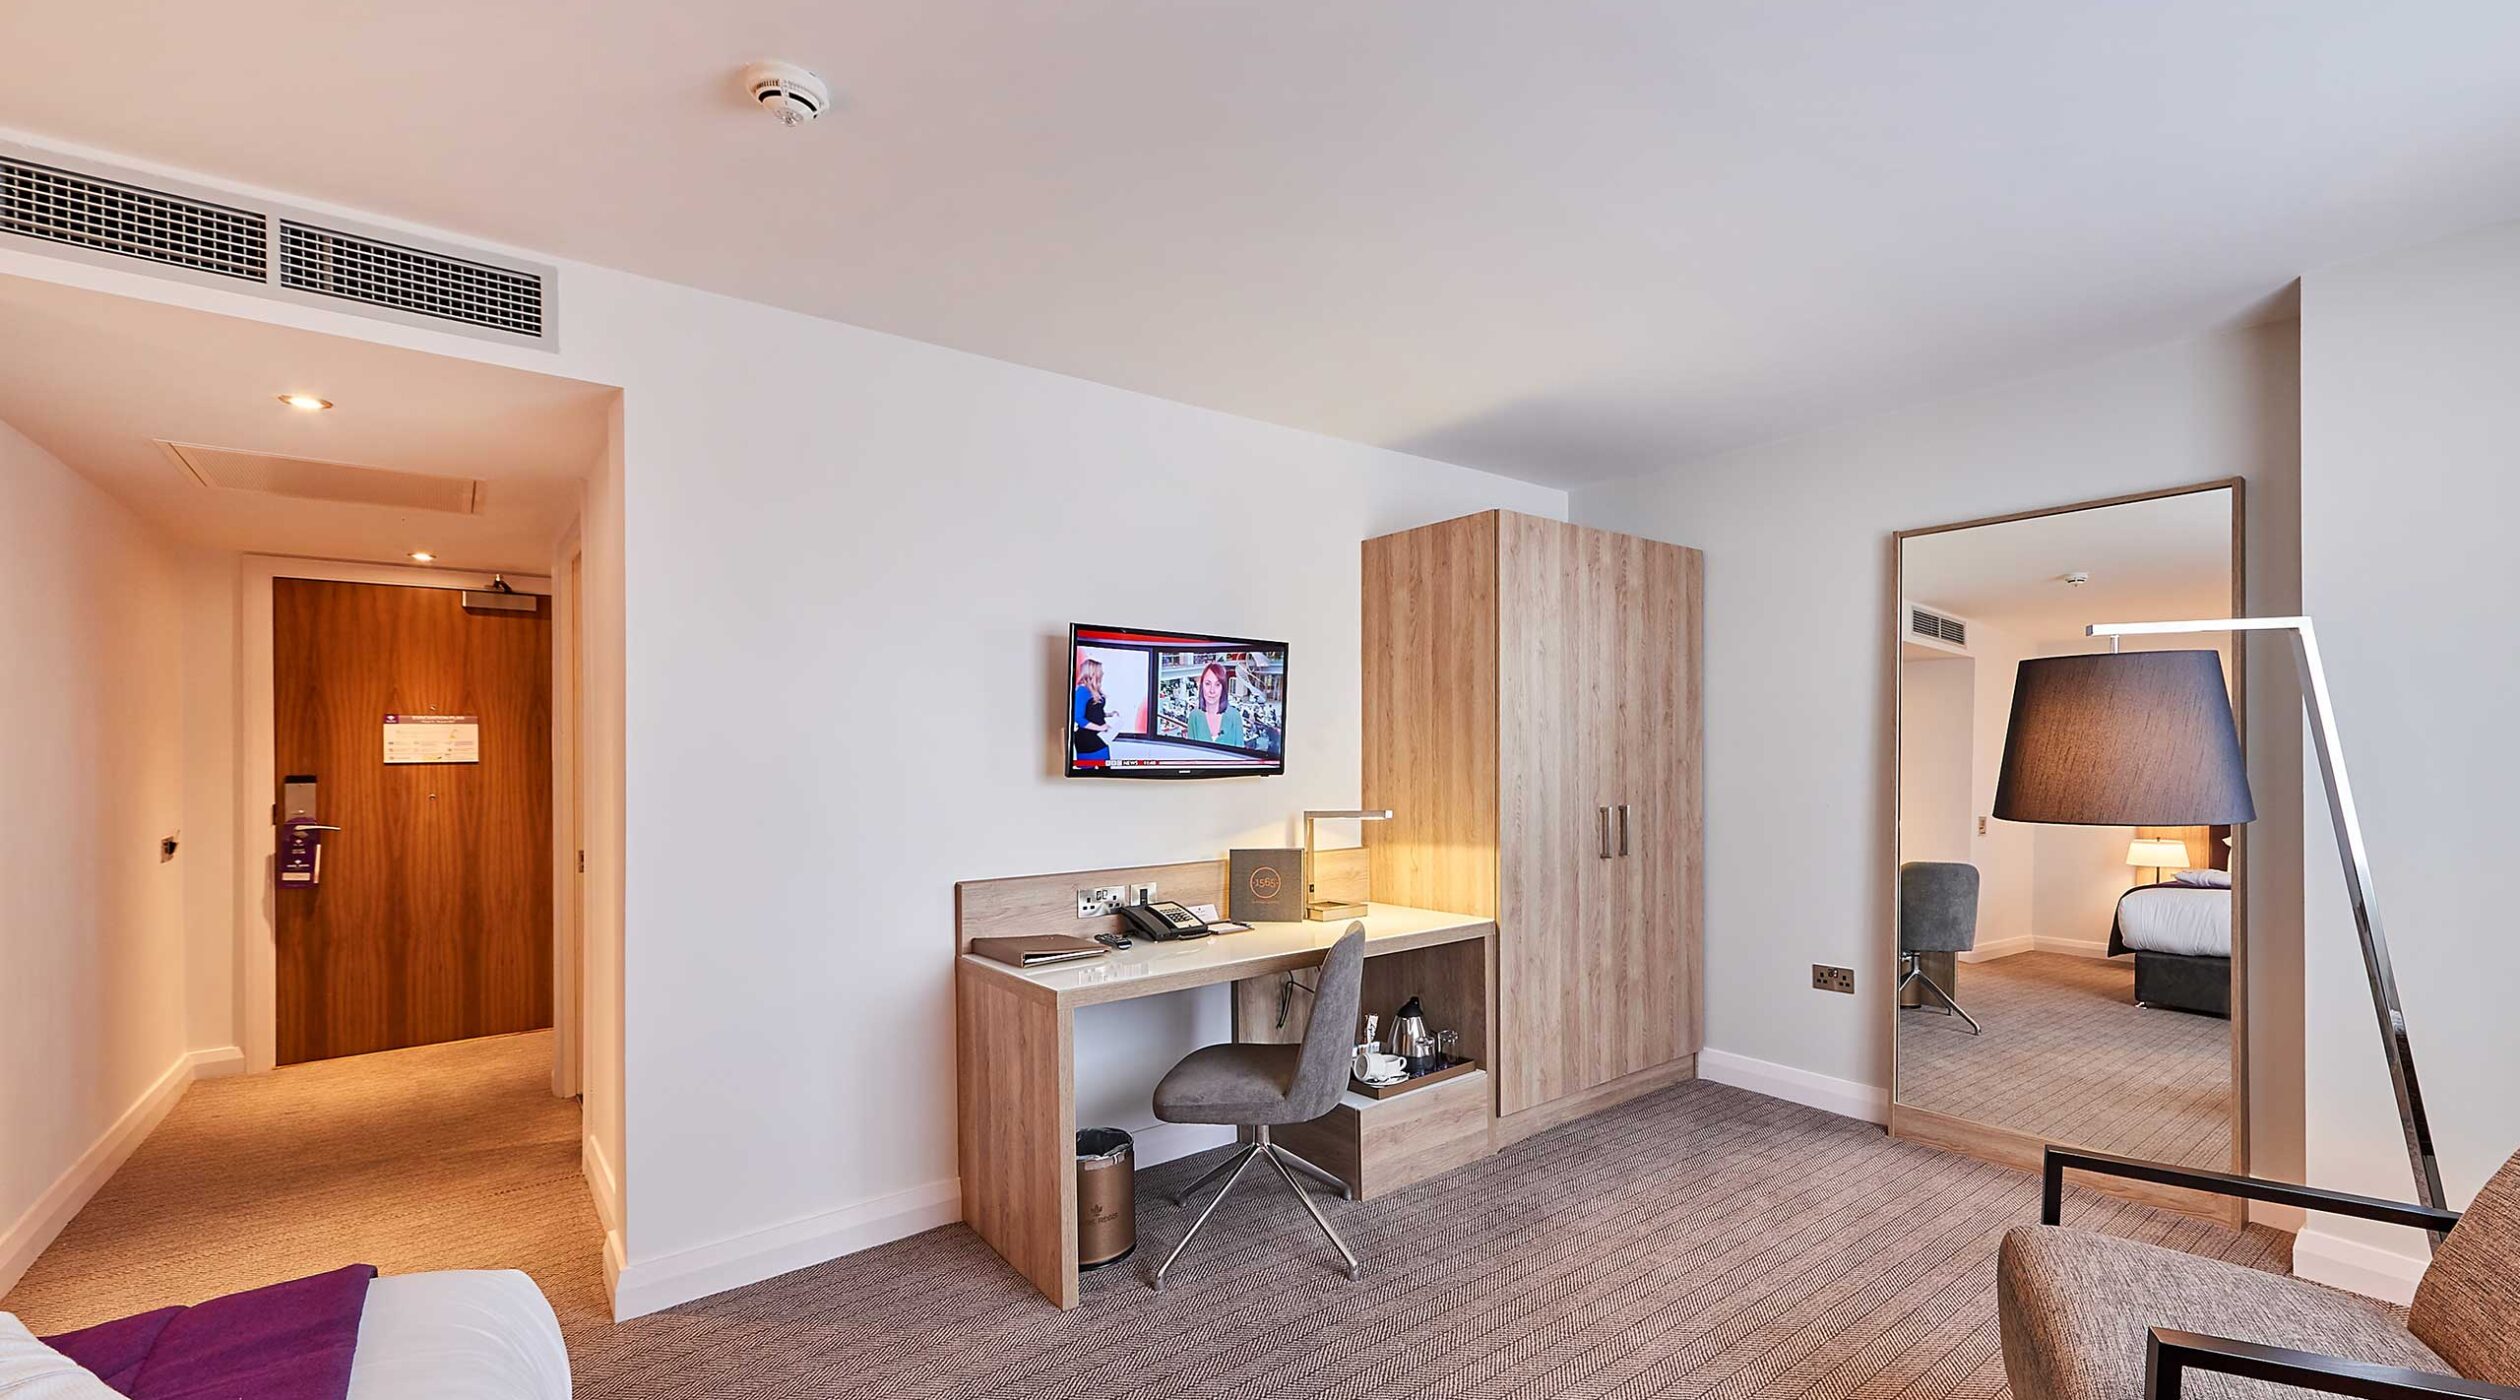 Park Regis Birmingham deluxe accessible room with large floor space, a desk, television, wardrobe, double bed and floor length mirror